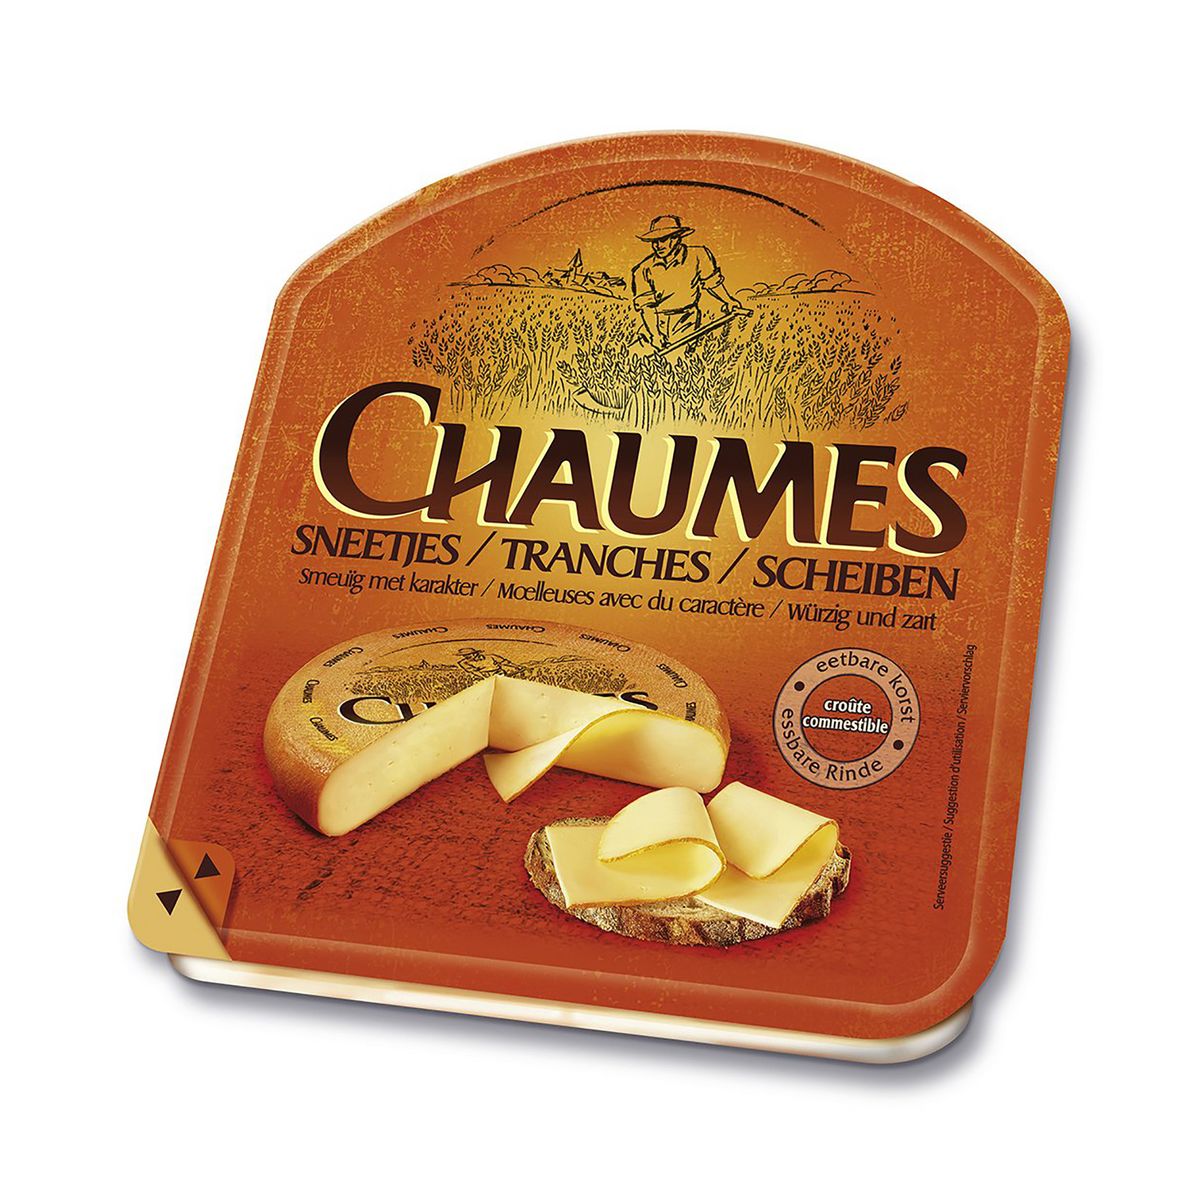 CHAUMES Chaumes en tranches 8 tranches 150g